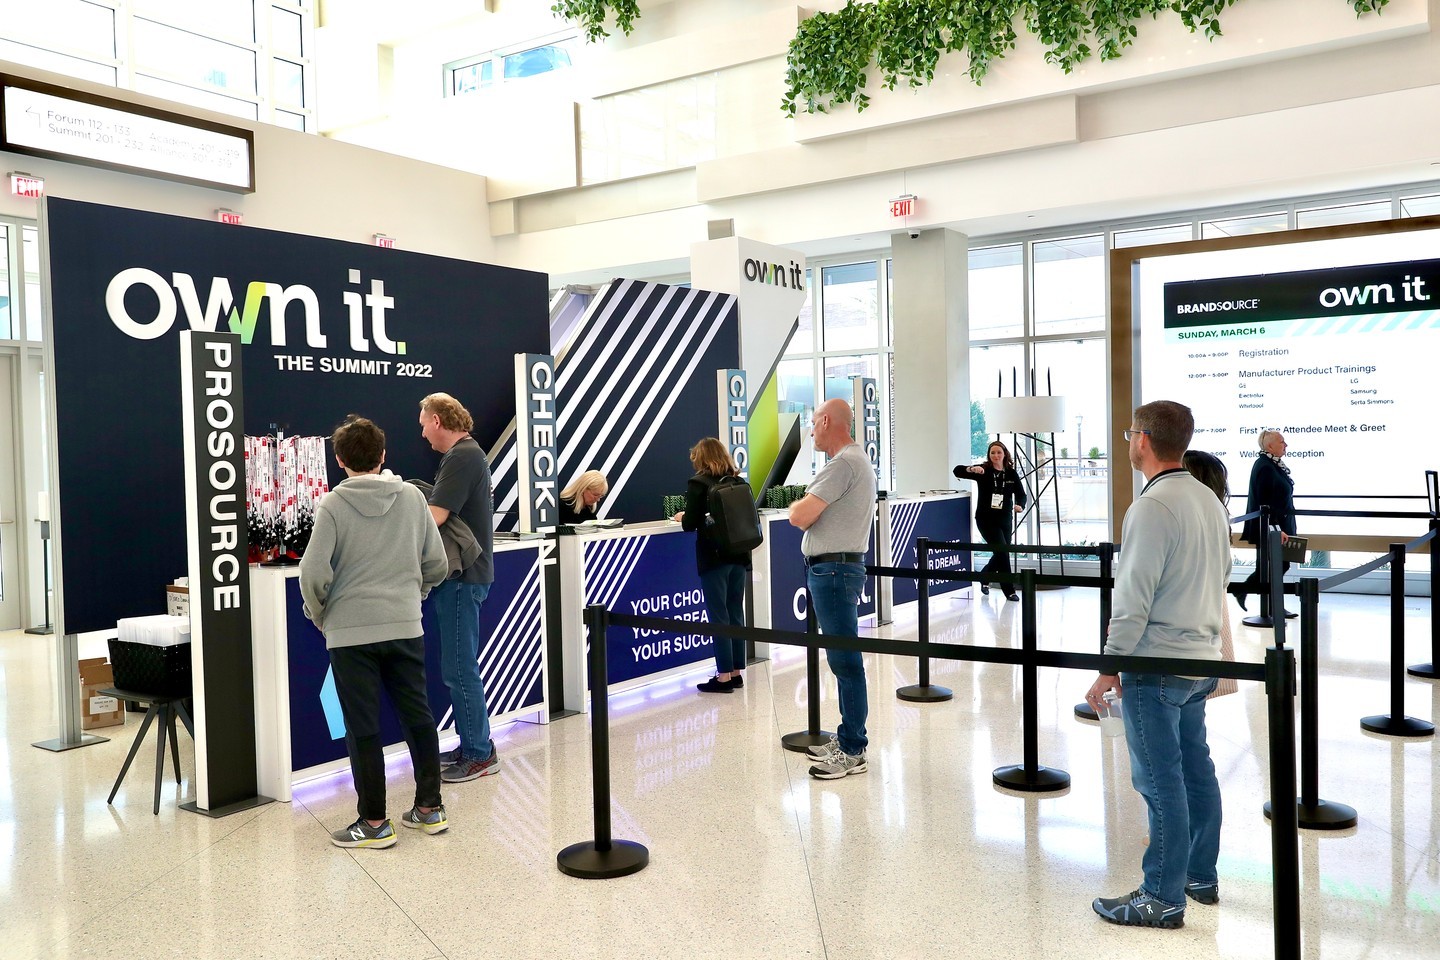 Registration is open! Go down the escalators to the Check-In desks and pick up your show badge! #OwnIt22